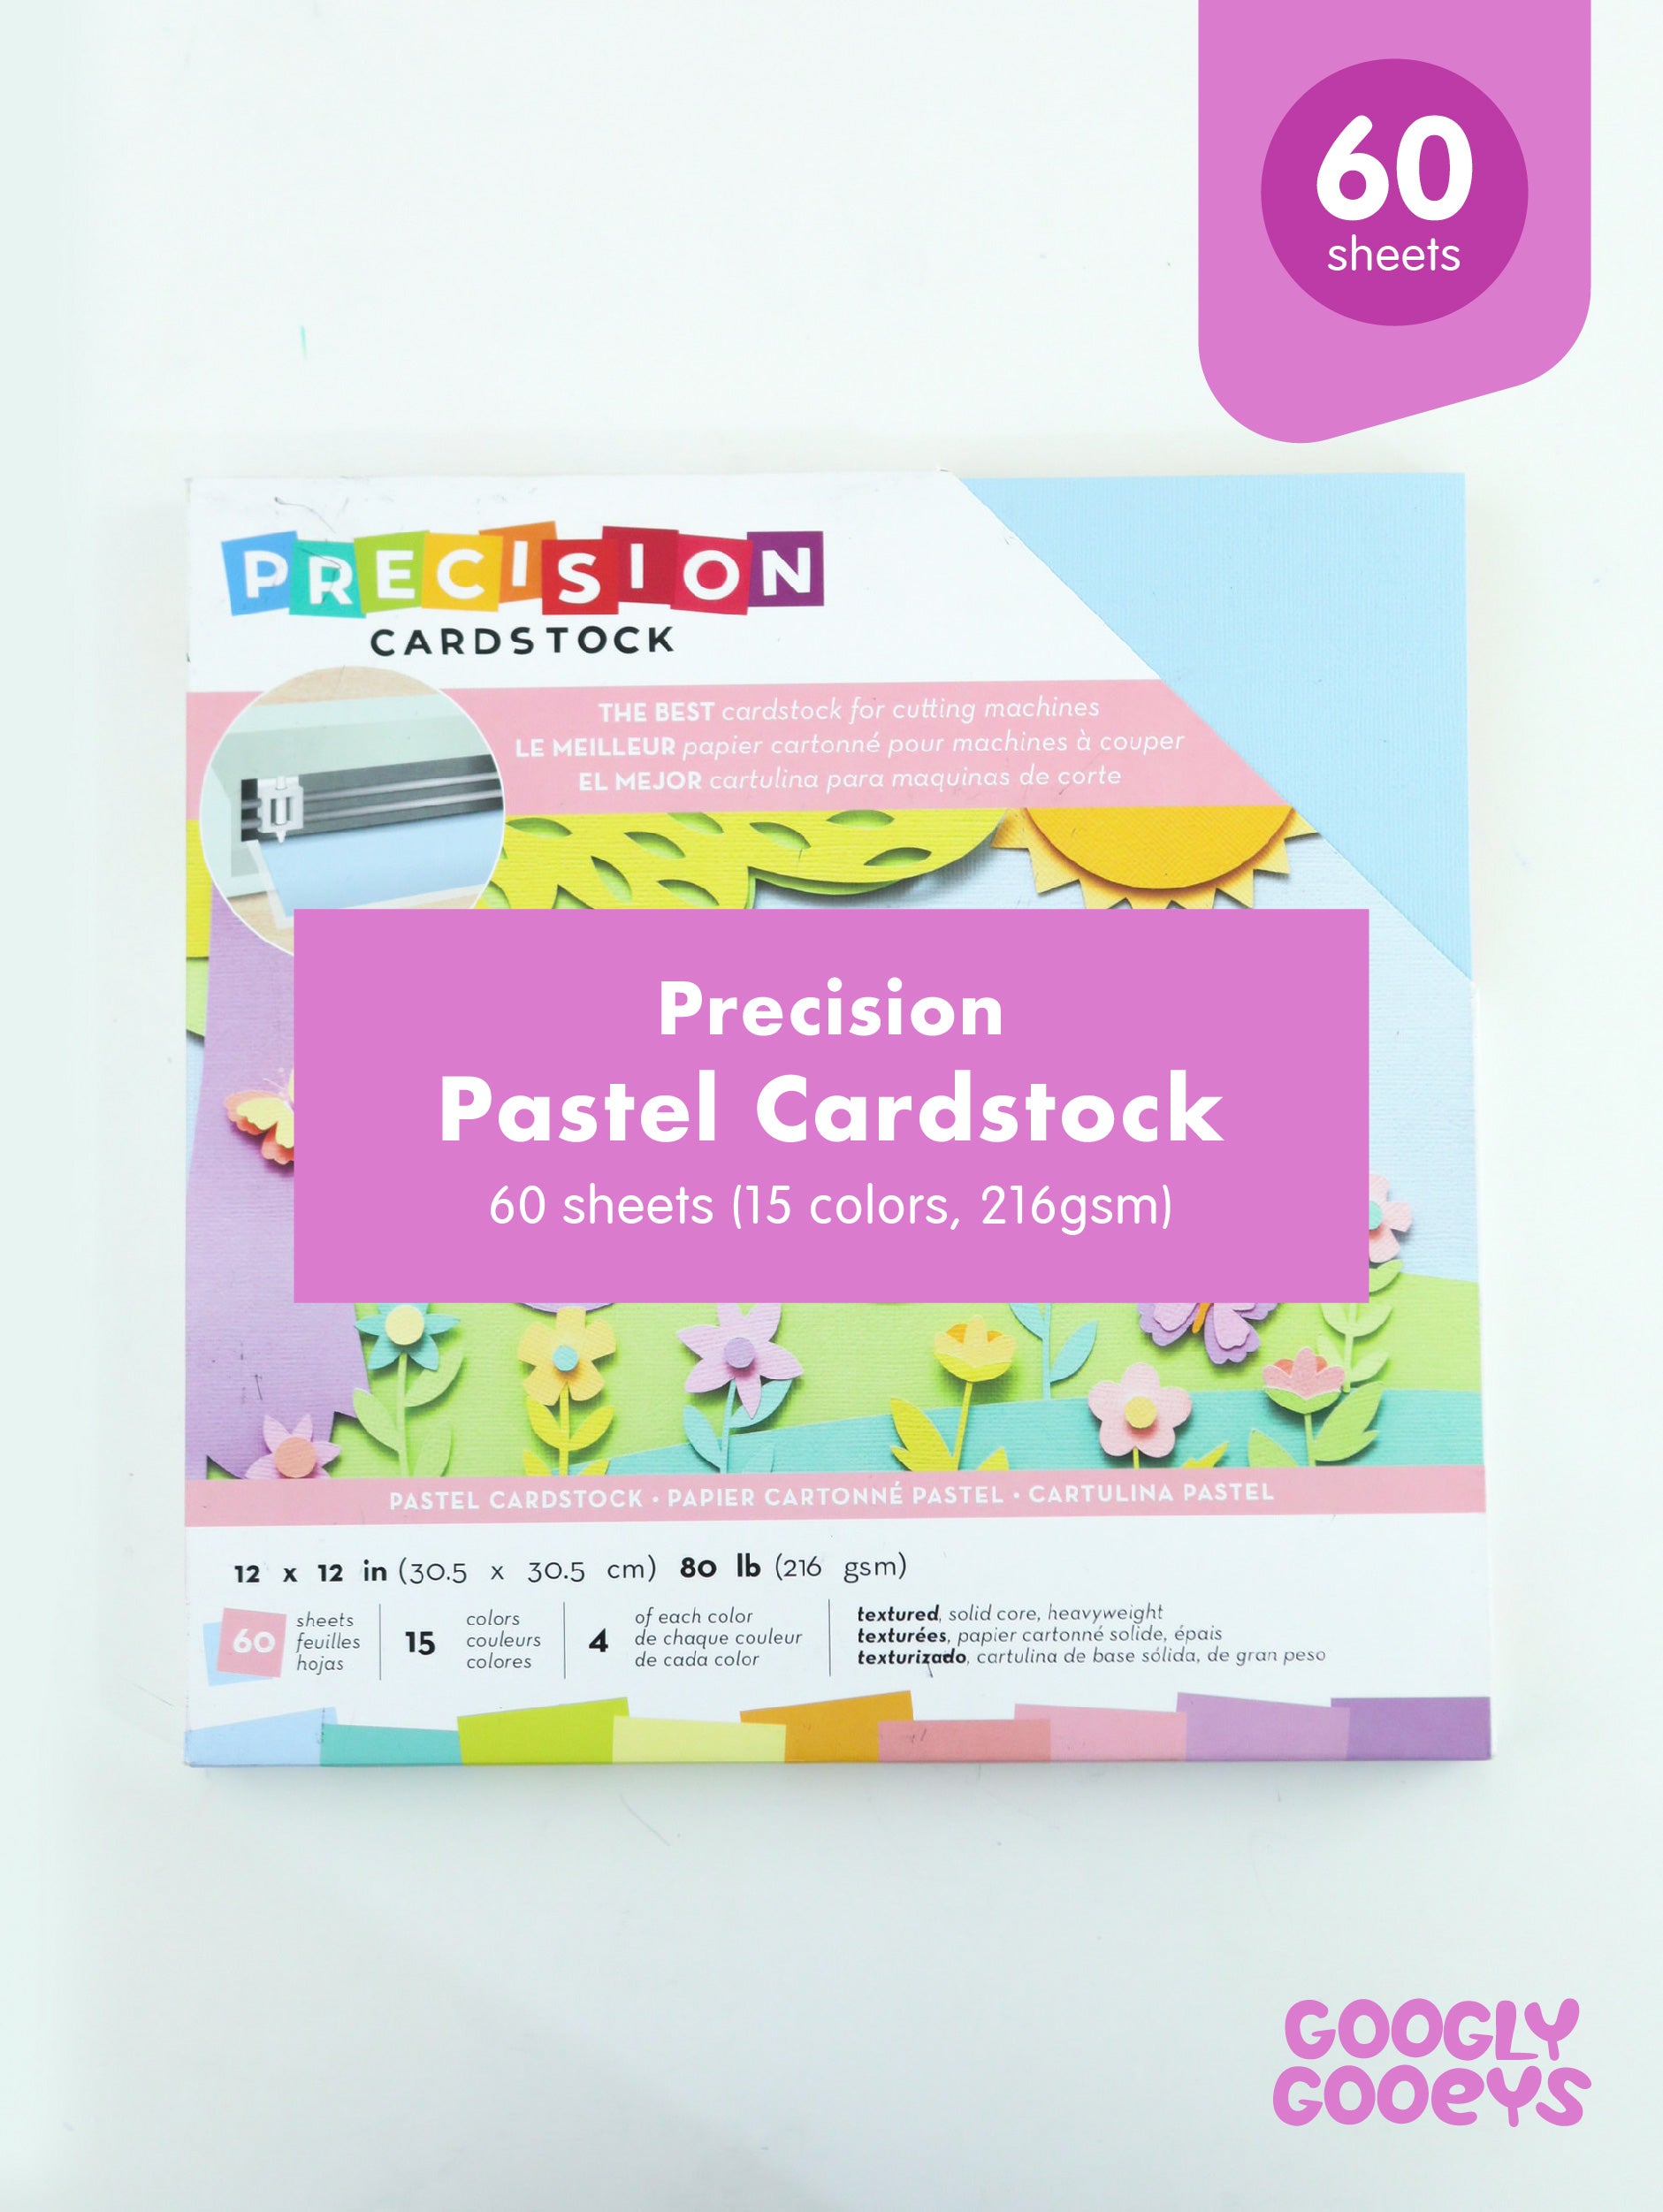 Precision Cardstock Pastel 12x12 inches (60 sheets, 216gsm)